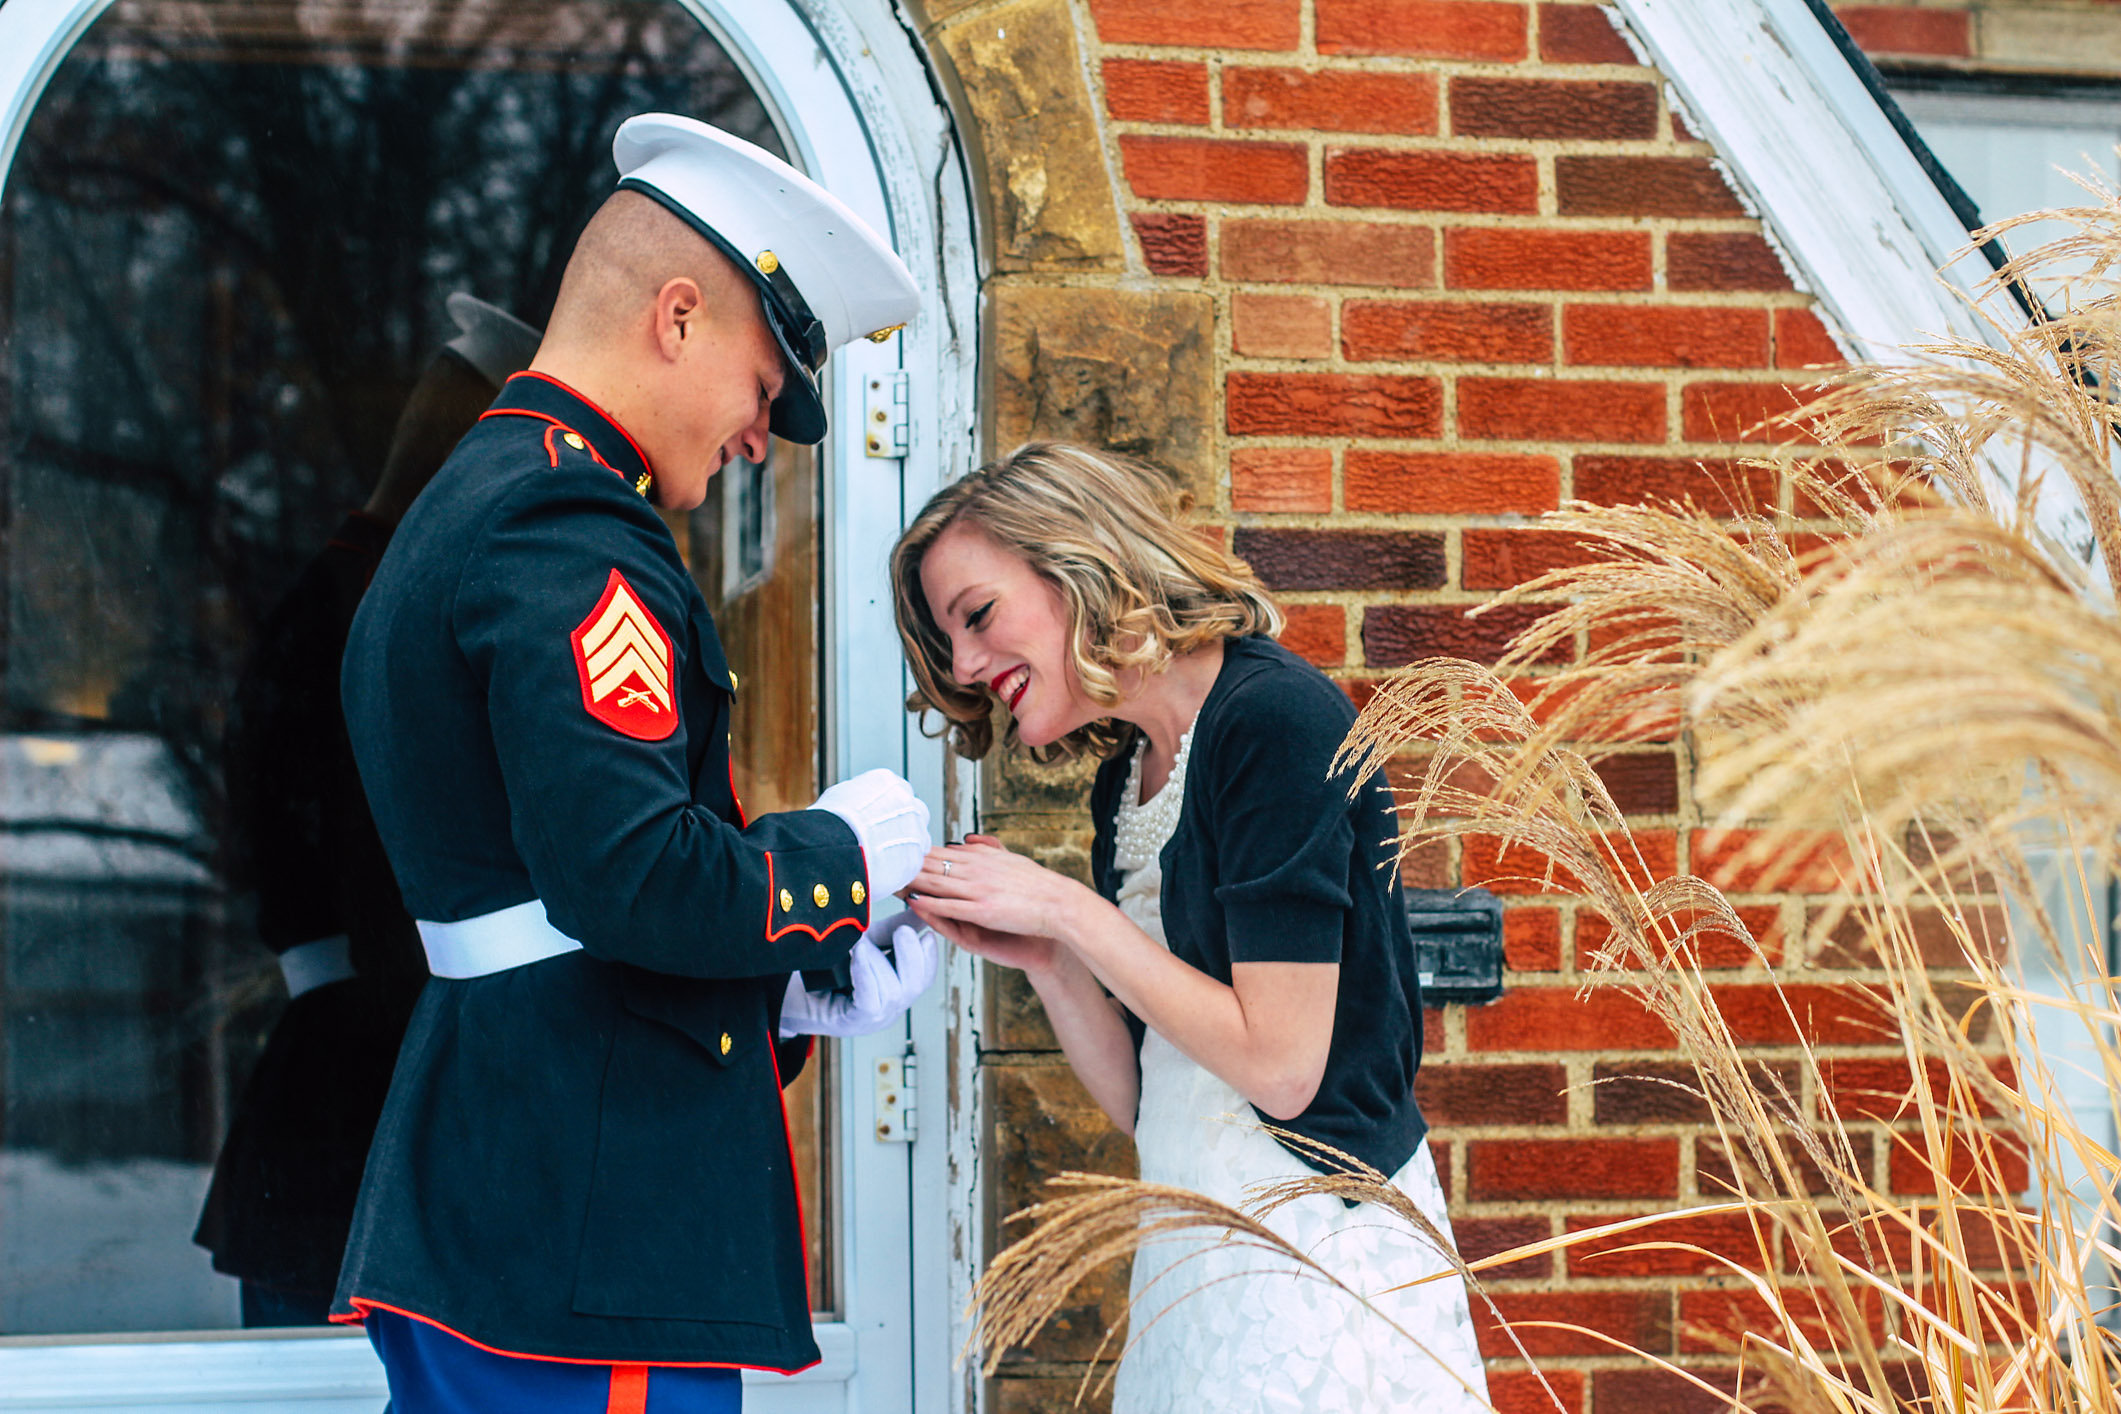 PHOTO: Jon Trommer, a Marine, surprised his girlfriend by popping the question on her snowy doorstep.